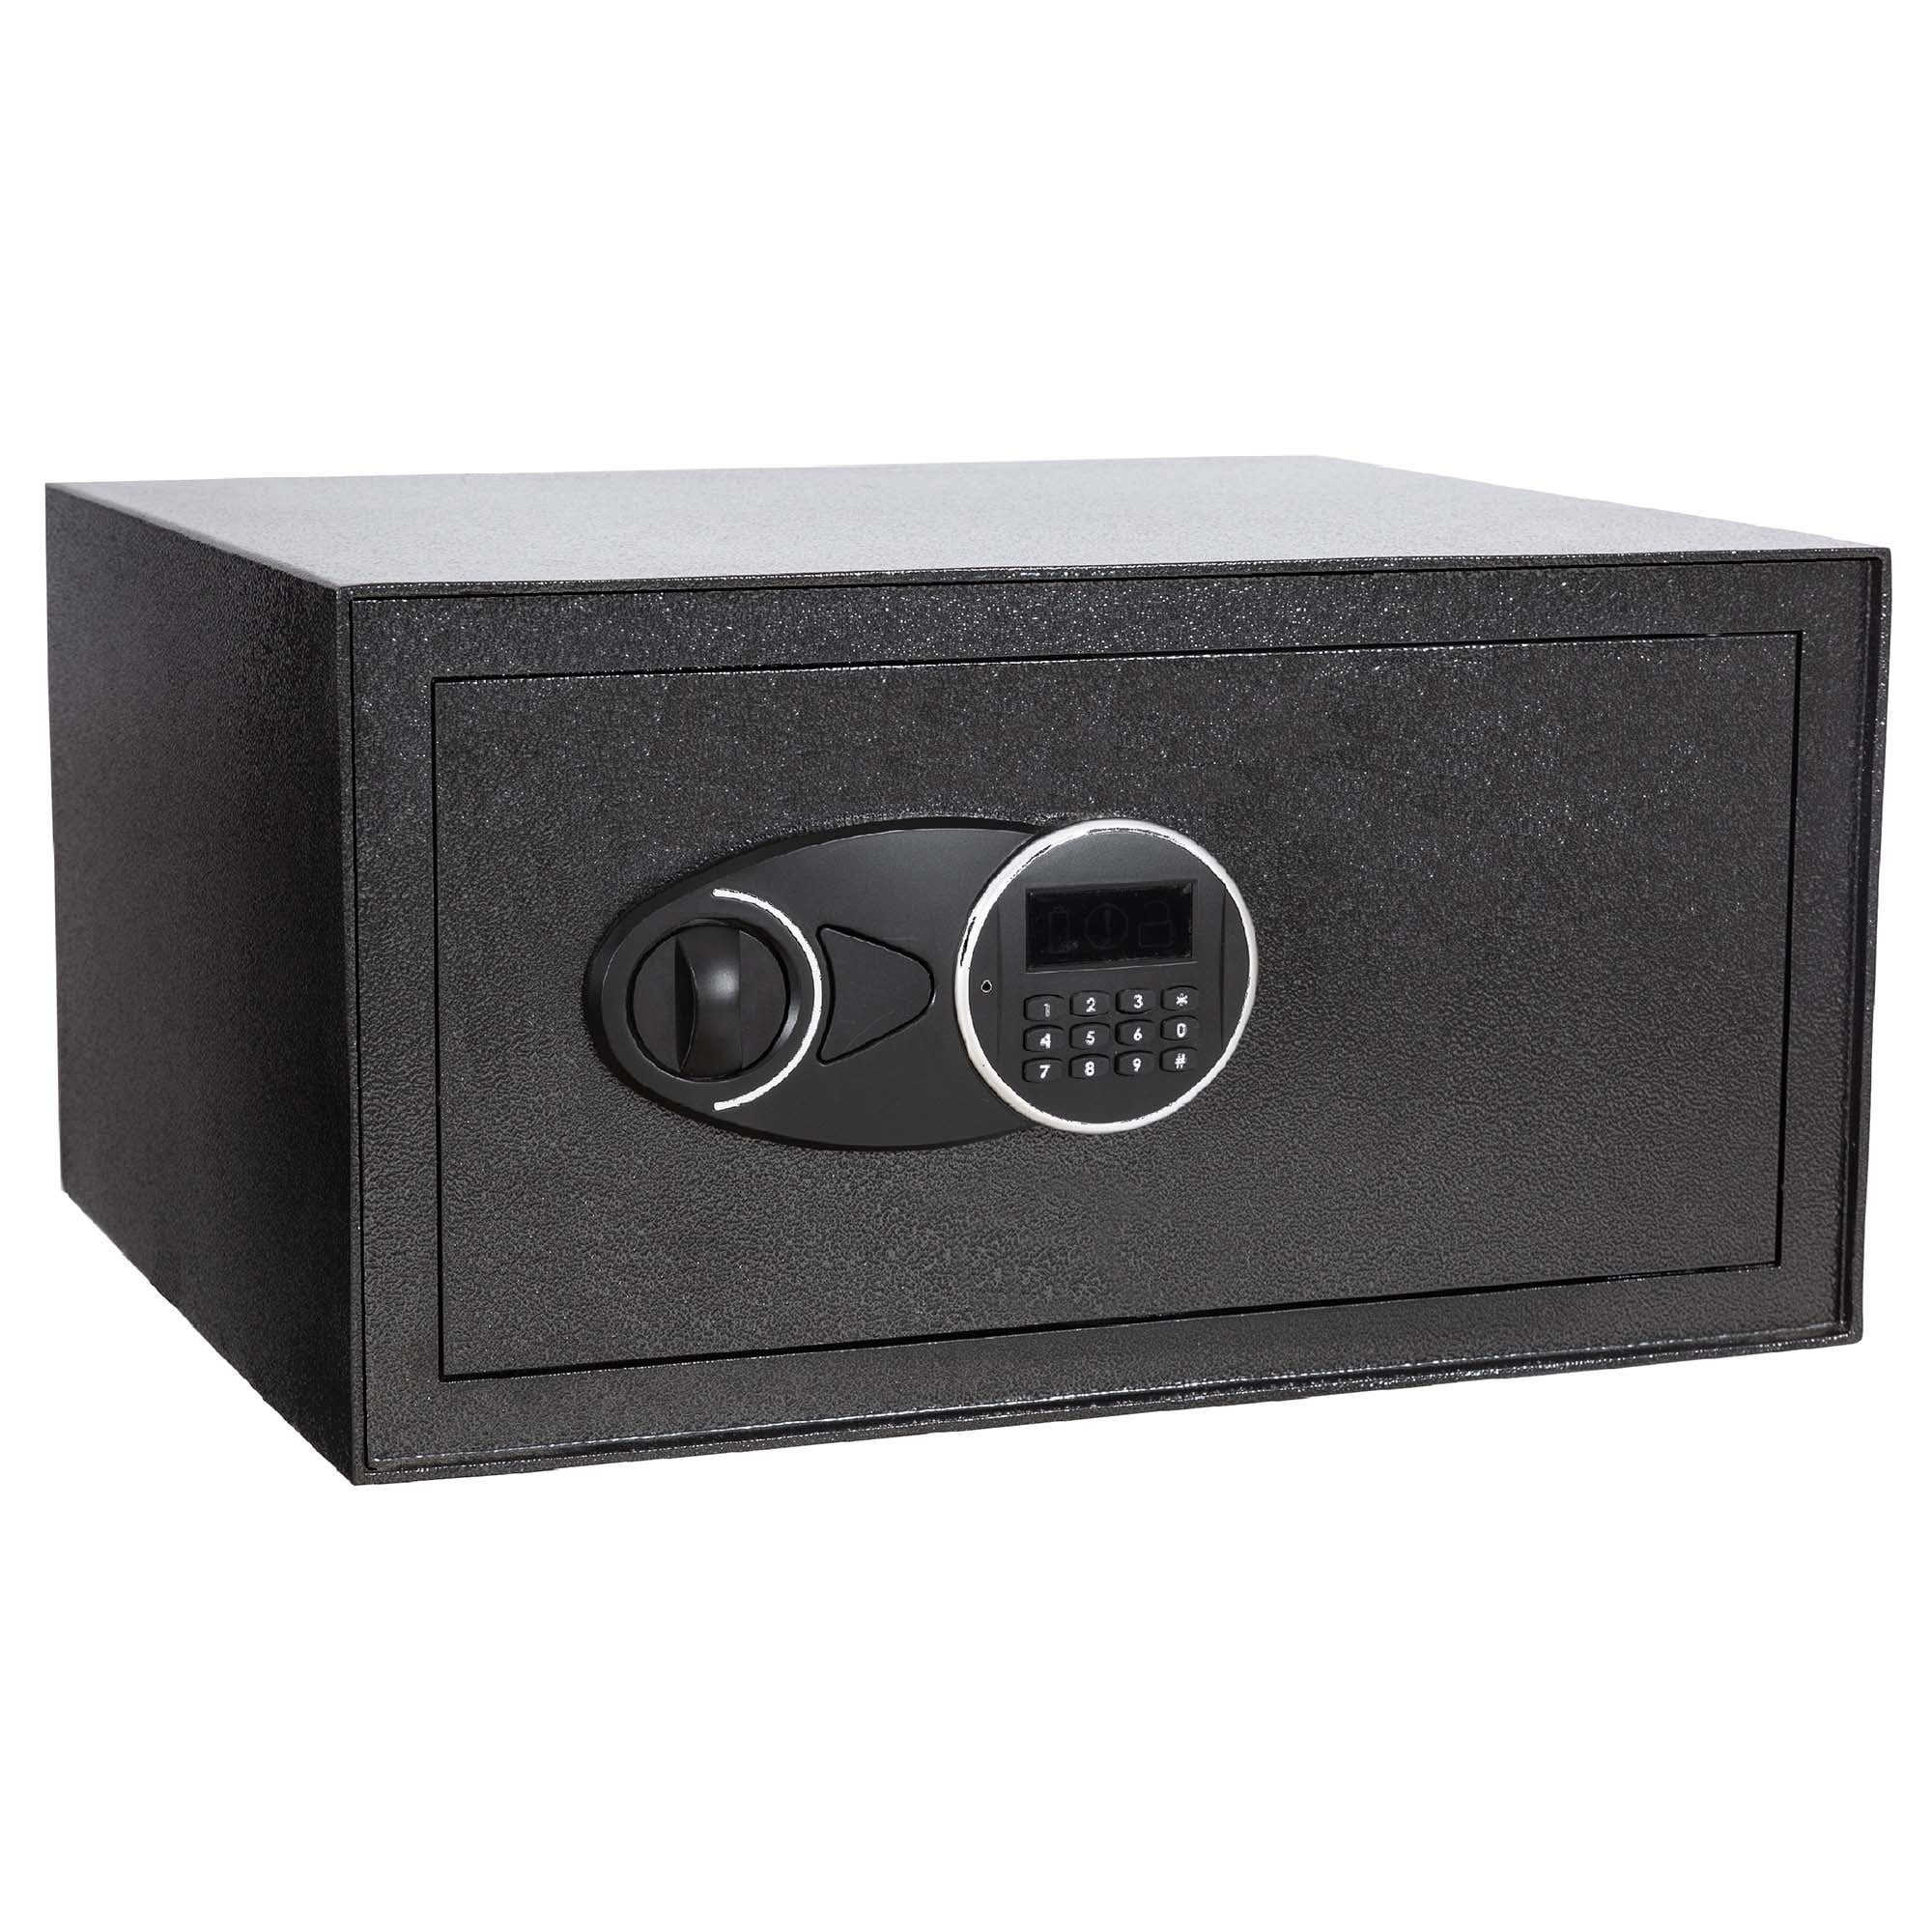 Digital Electronic Safe Box Depository Money Jewelry Home Office Hotel Security 